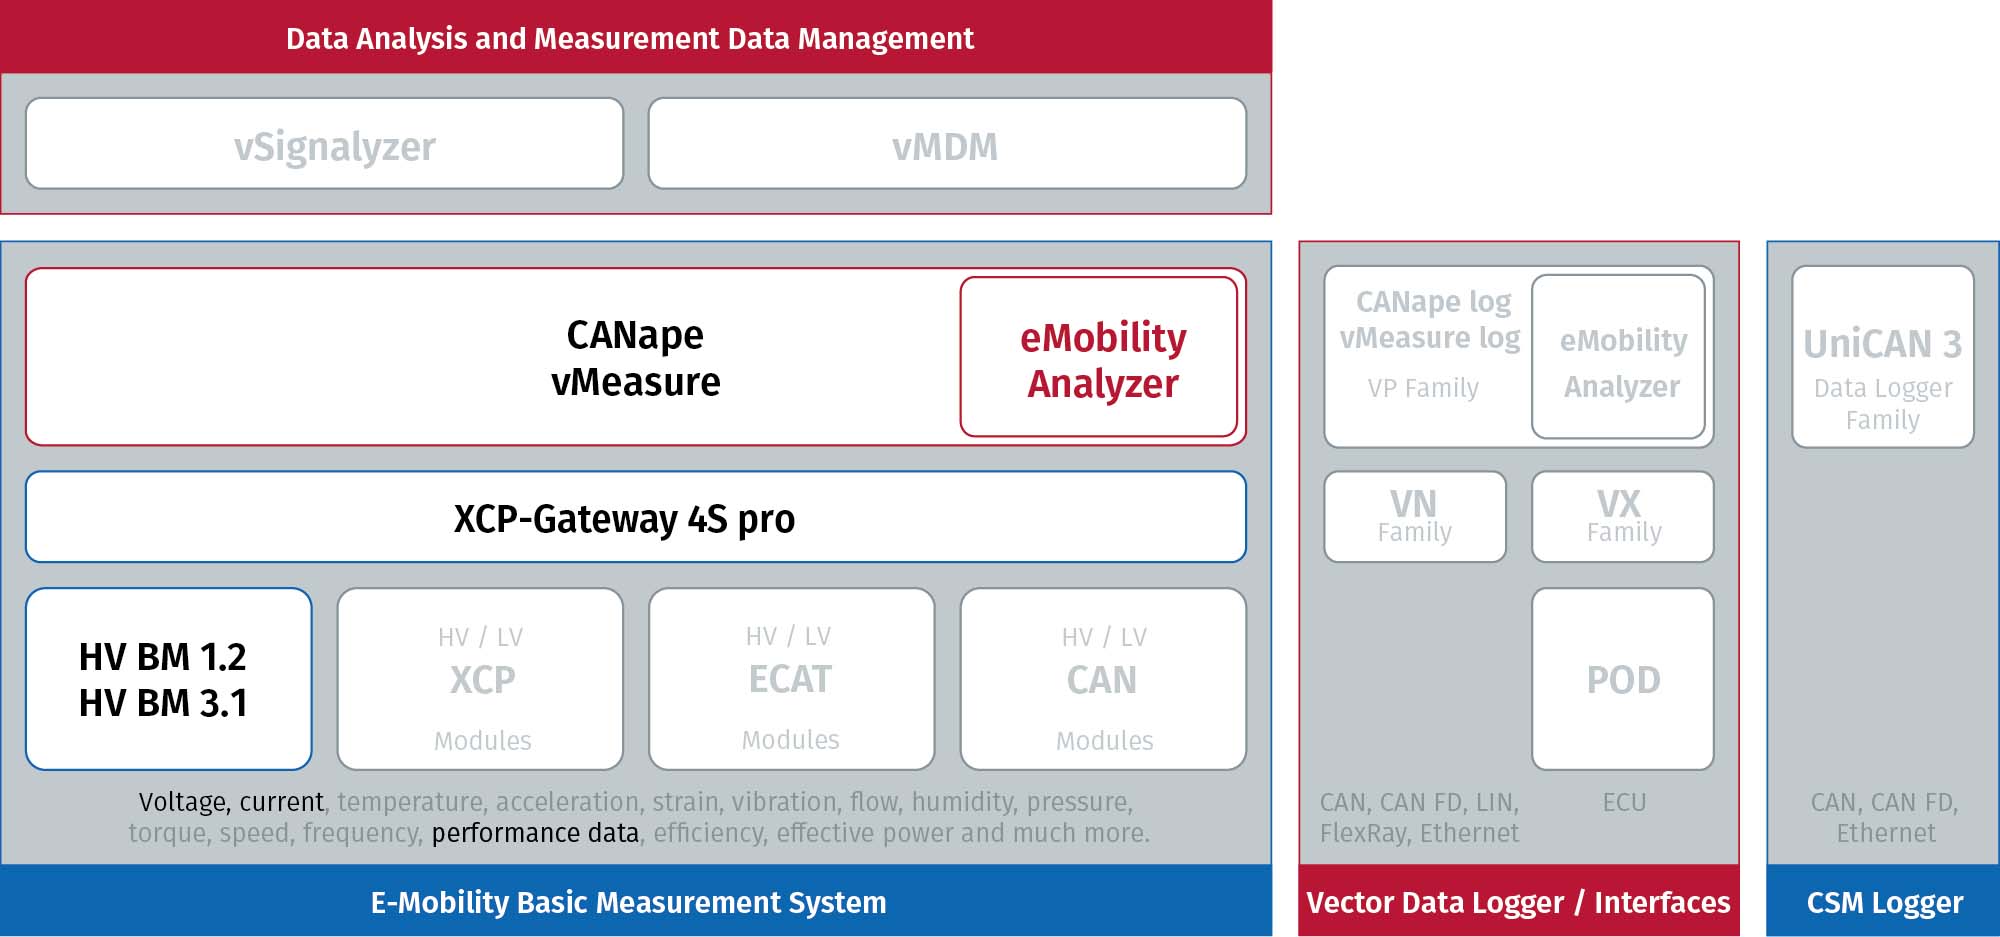 WLTP Measurement in E-Mobility Measurement System